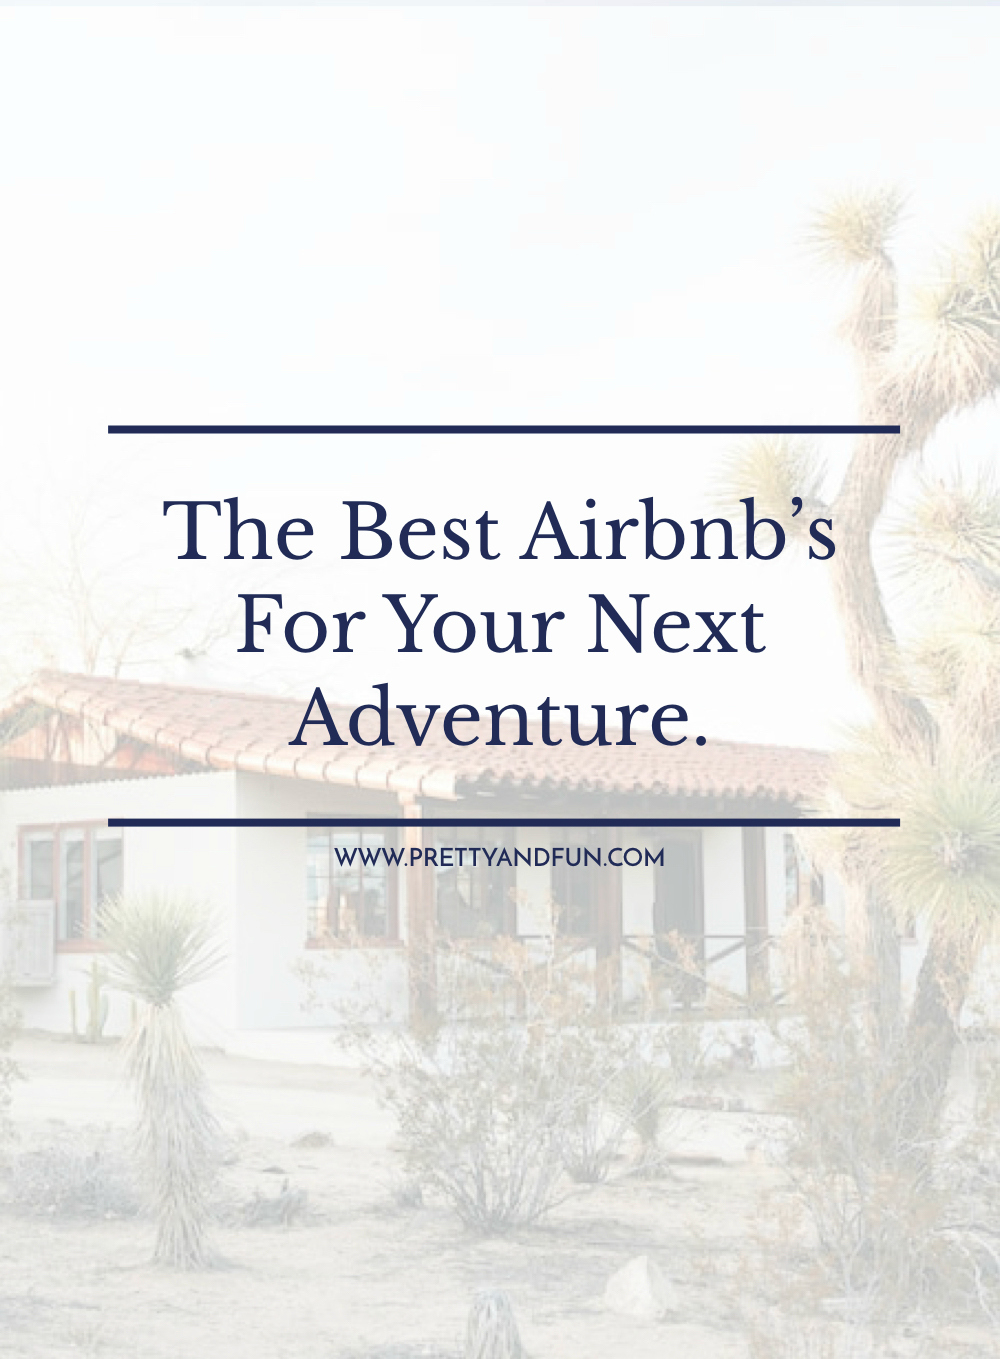 10 Of The Best Airbnbs Across The Globe.